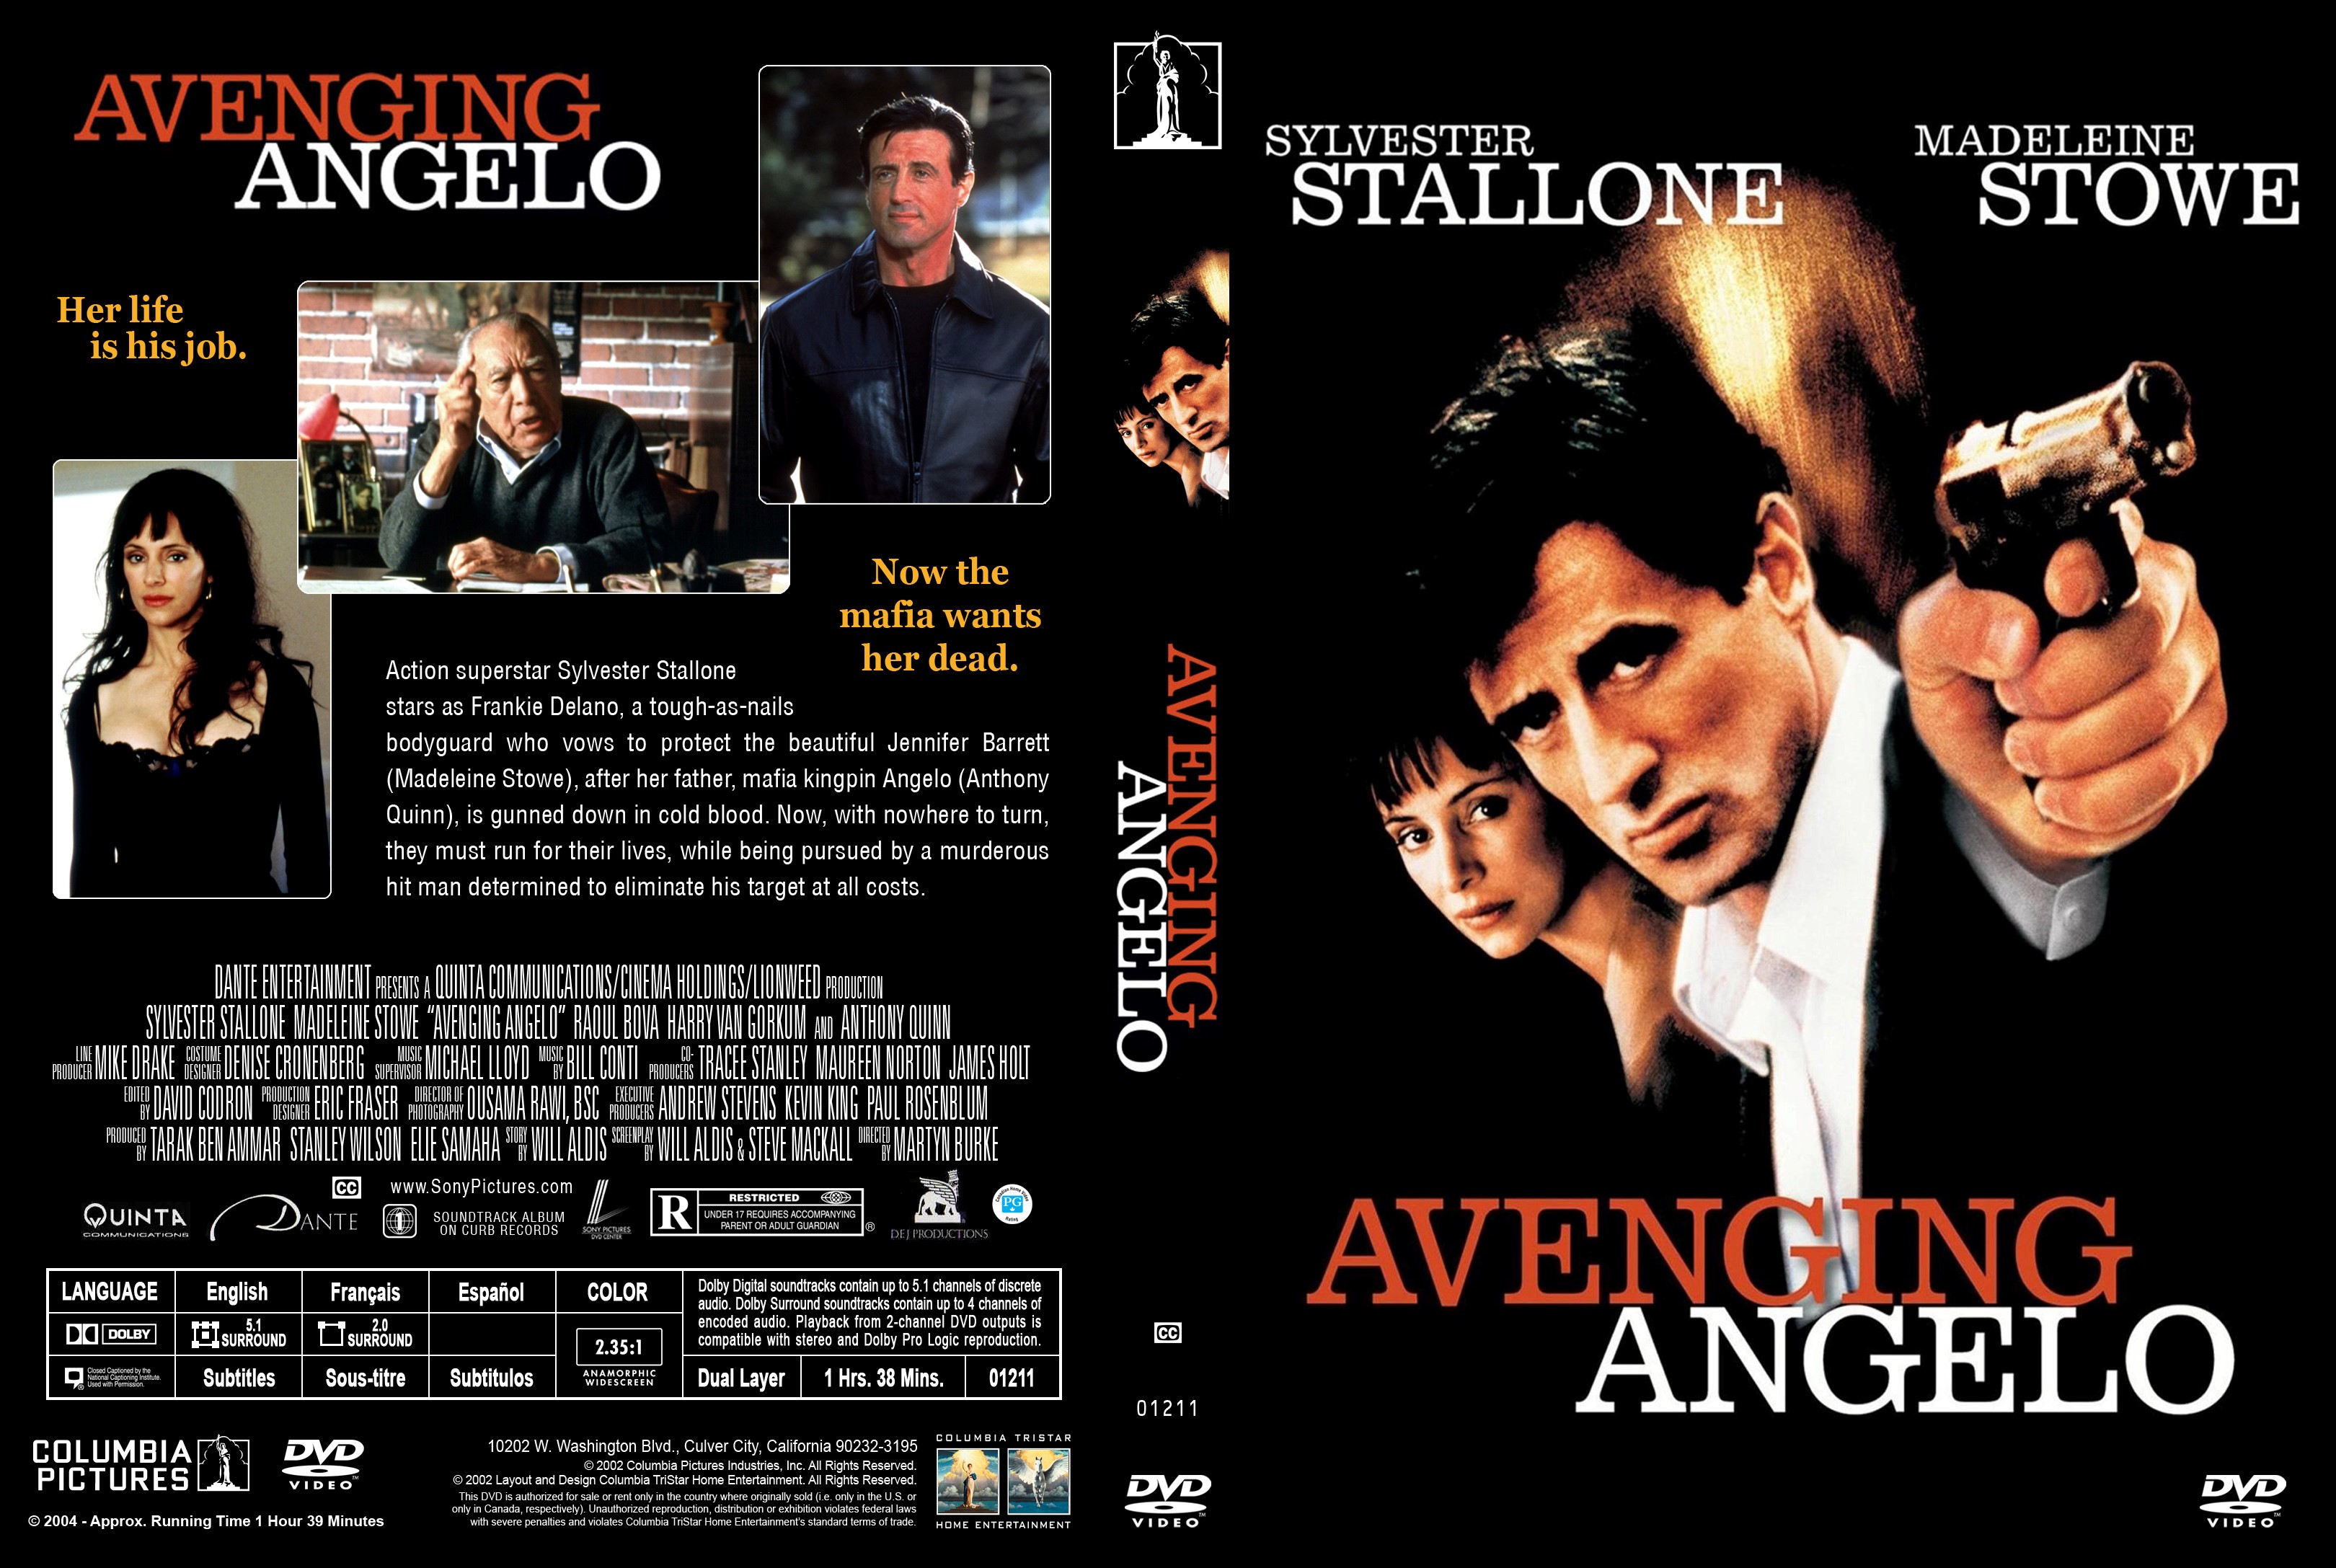 Avenging Angelo DVD Cover | Cover Addict - Free DVD ...